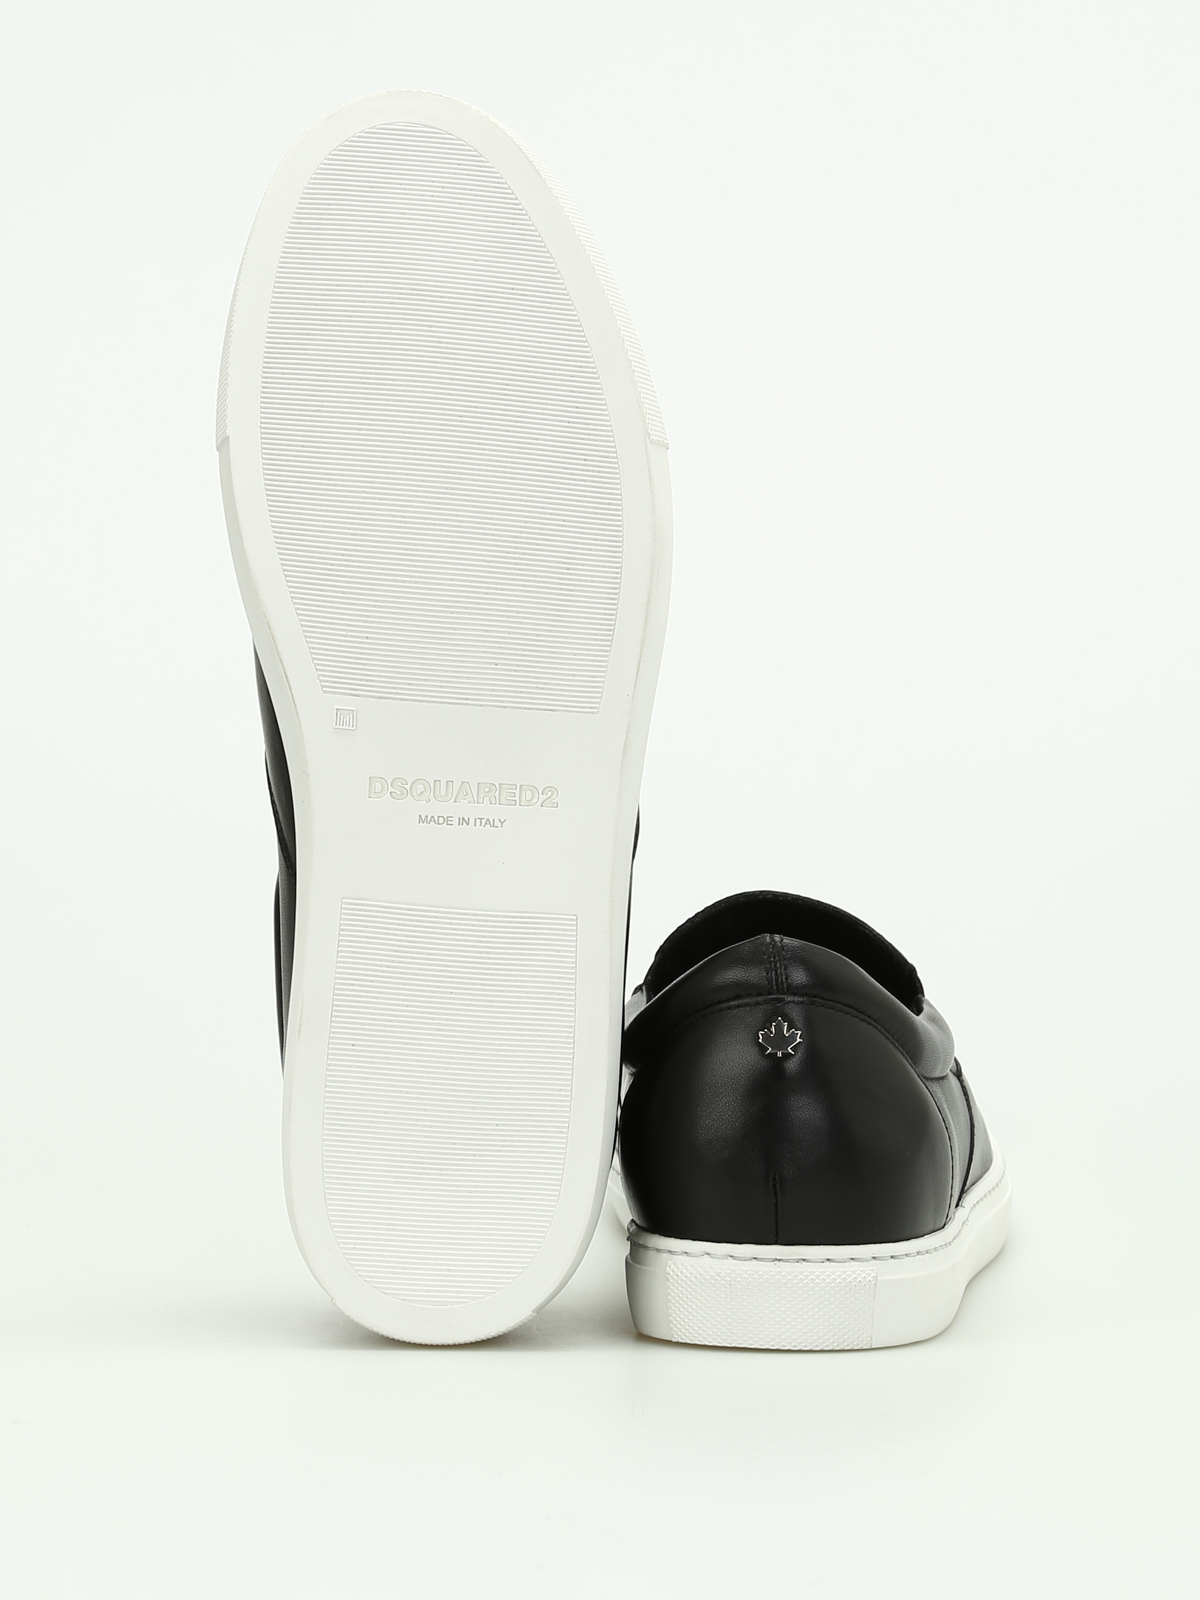 dsquared2 tux sneakers